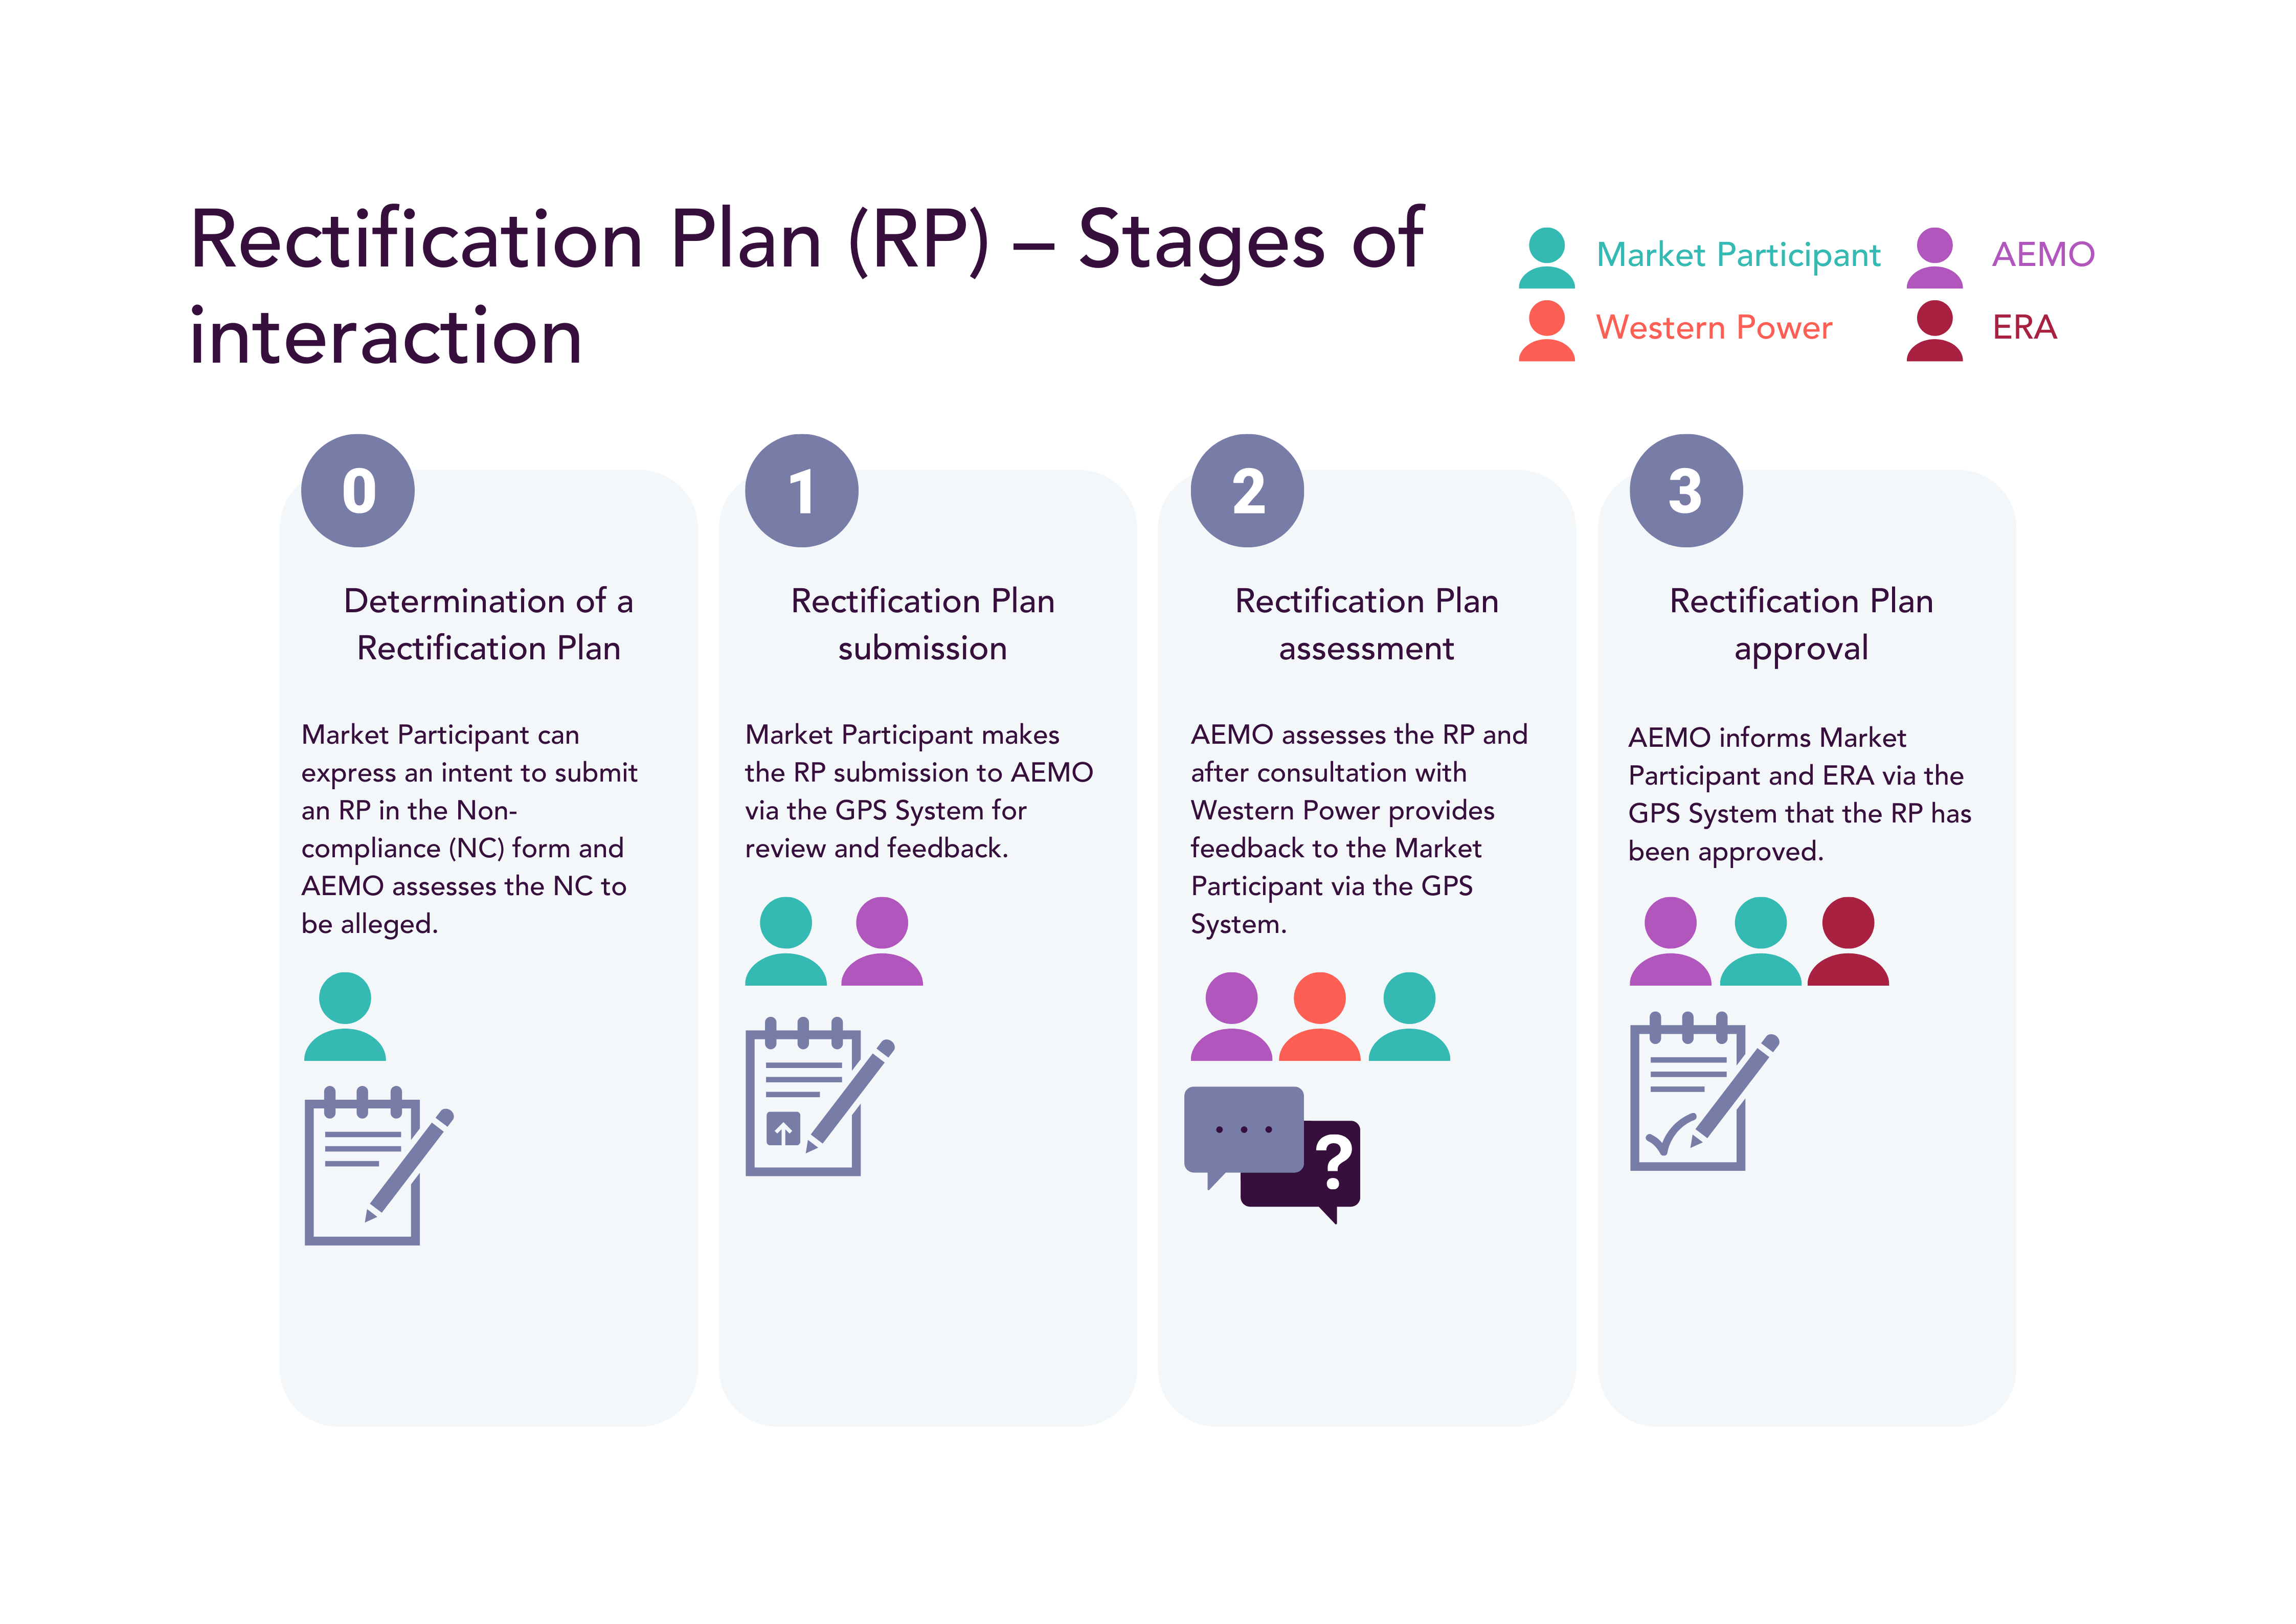 Rectification Plan submission and assessment process image